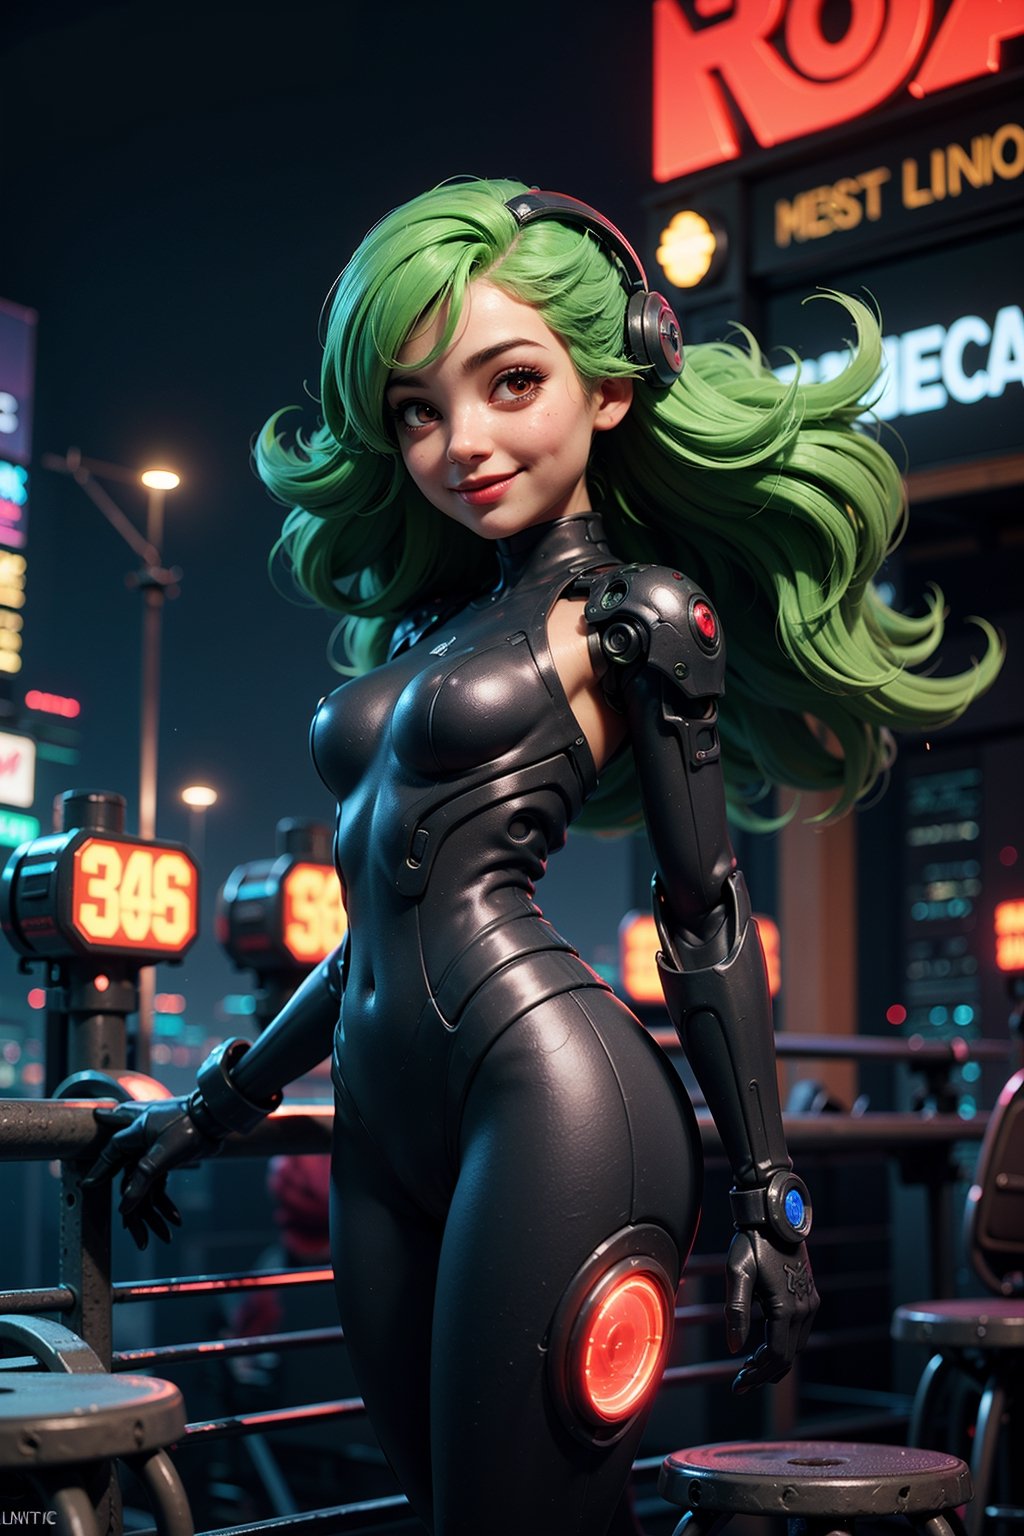 (Vivid neon night, detailed background), (petite cyborg girl, cute face, perky breasts), cute smile, Amidst the vibrant neon night of a futuristic cyberpunk city, the scene bursts with intricate details. A petite and cute cyborg girl, her face perfect and her anatomy flawless, stands with bright, glowing red eyes. Her absurdly long gradient red and green hair flows in the wind as she dons a detailed ribbed impossible bodysuit, featuring shoulder armor and cybernetic limbs, all captured from a dynamic angle.